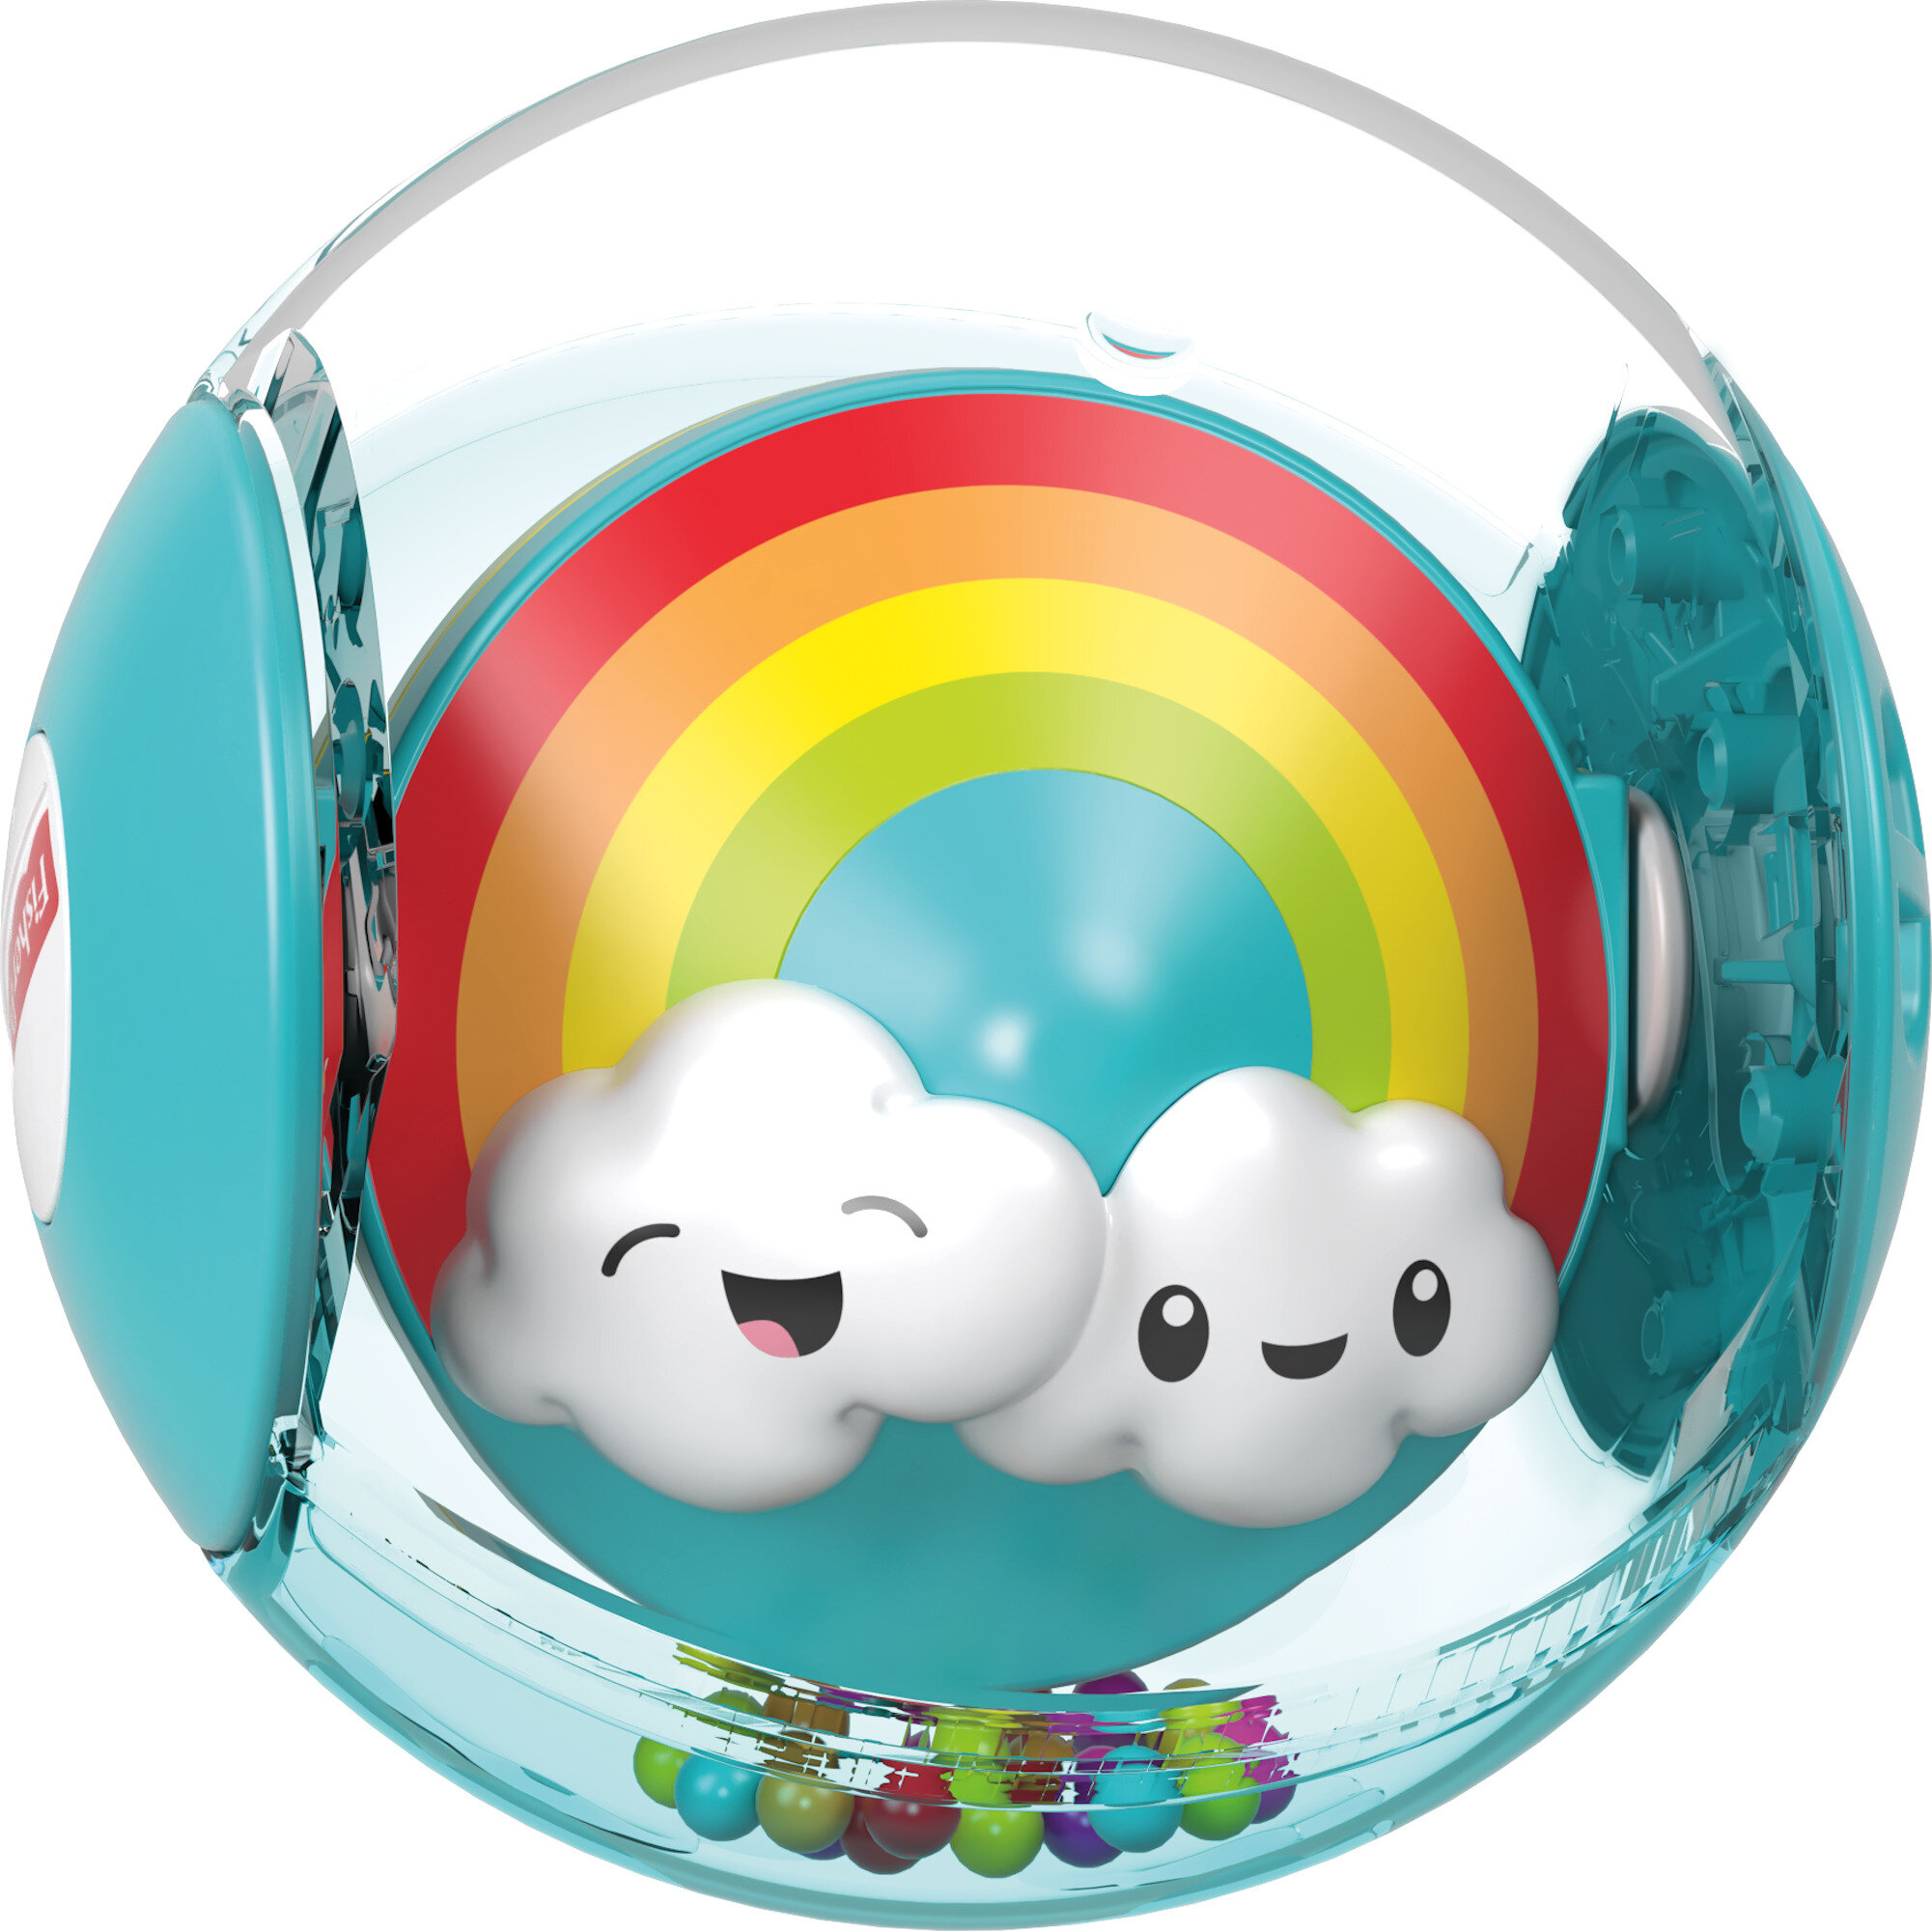 Fisher-Price Hello Sunshine Rattle Ball with Rainbow-Colored Beads - image 1 of 4